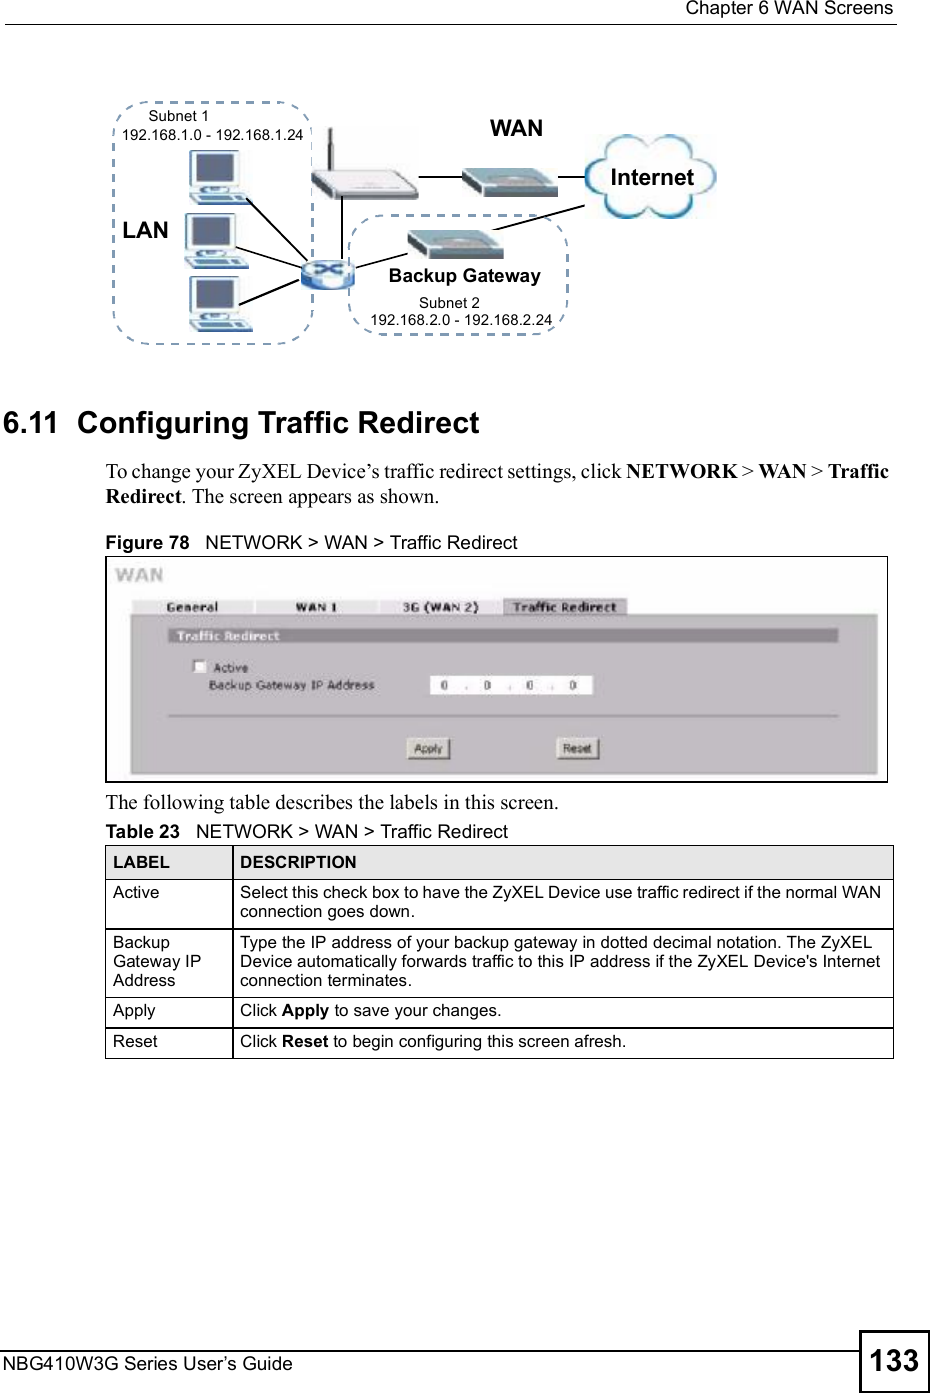  Chapter 6WAN ScreensNBG410W3G Series User s Guide 1336.11  Configuring Traffic RedirectTo change your ZyXEL Device!s traffic redirect settings, click NETWORK &gt; WAN &gt; Traffic Redirect. The screen appears as shown.Figure 78   NETWORK &gt; WAN &gt; Traffic RedirectThe following table describes the labels in this screen.InternetWANLANBackup GatewaySubnet 2192.168.2.0 - 192.168.2.24Subnet 1192.168.1.0 - 192.168.1.24Table 23   NETWORK &gt; WAN &gt; Traffic RedirectLABEL DESCRIPTIONActiveSelect this check box to have the ZyXEL Device use traffic redirect if the normal WAN connection goes down.Backup Gateway IP AddressType the IP address of your backup gateway in dotted decimal notation. The ZyXEL Device automatically forwards traffic to this IP address if the ZyXEL Device&apos;s Internet connection terminates. ApplyClick Apply to save your changes.ResetClick Reset to begin configuring this screen afresh.